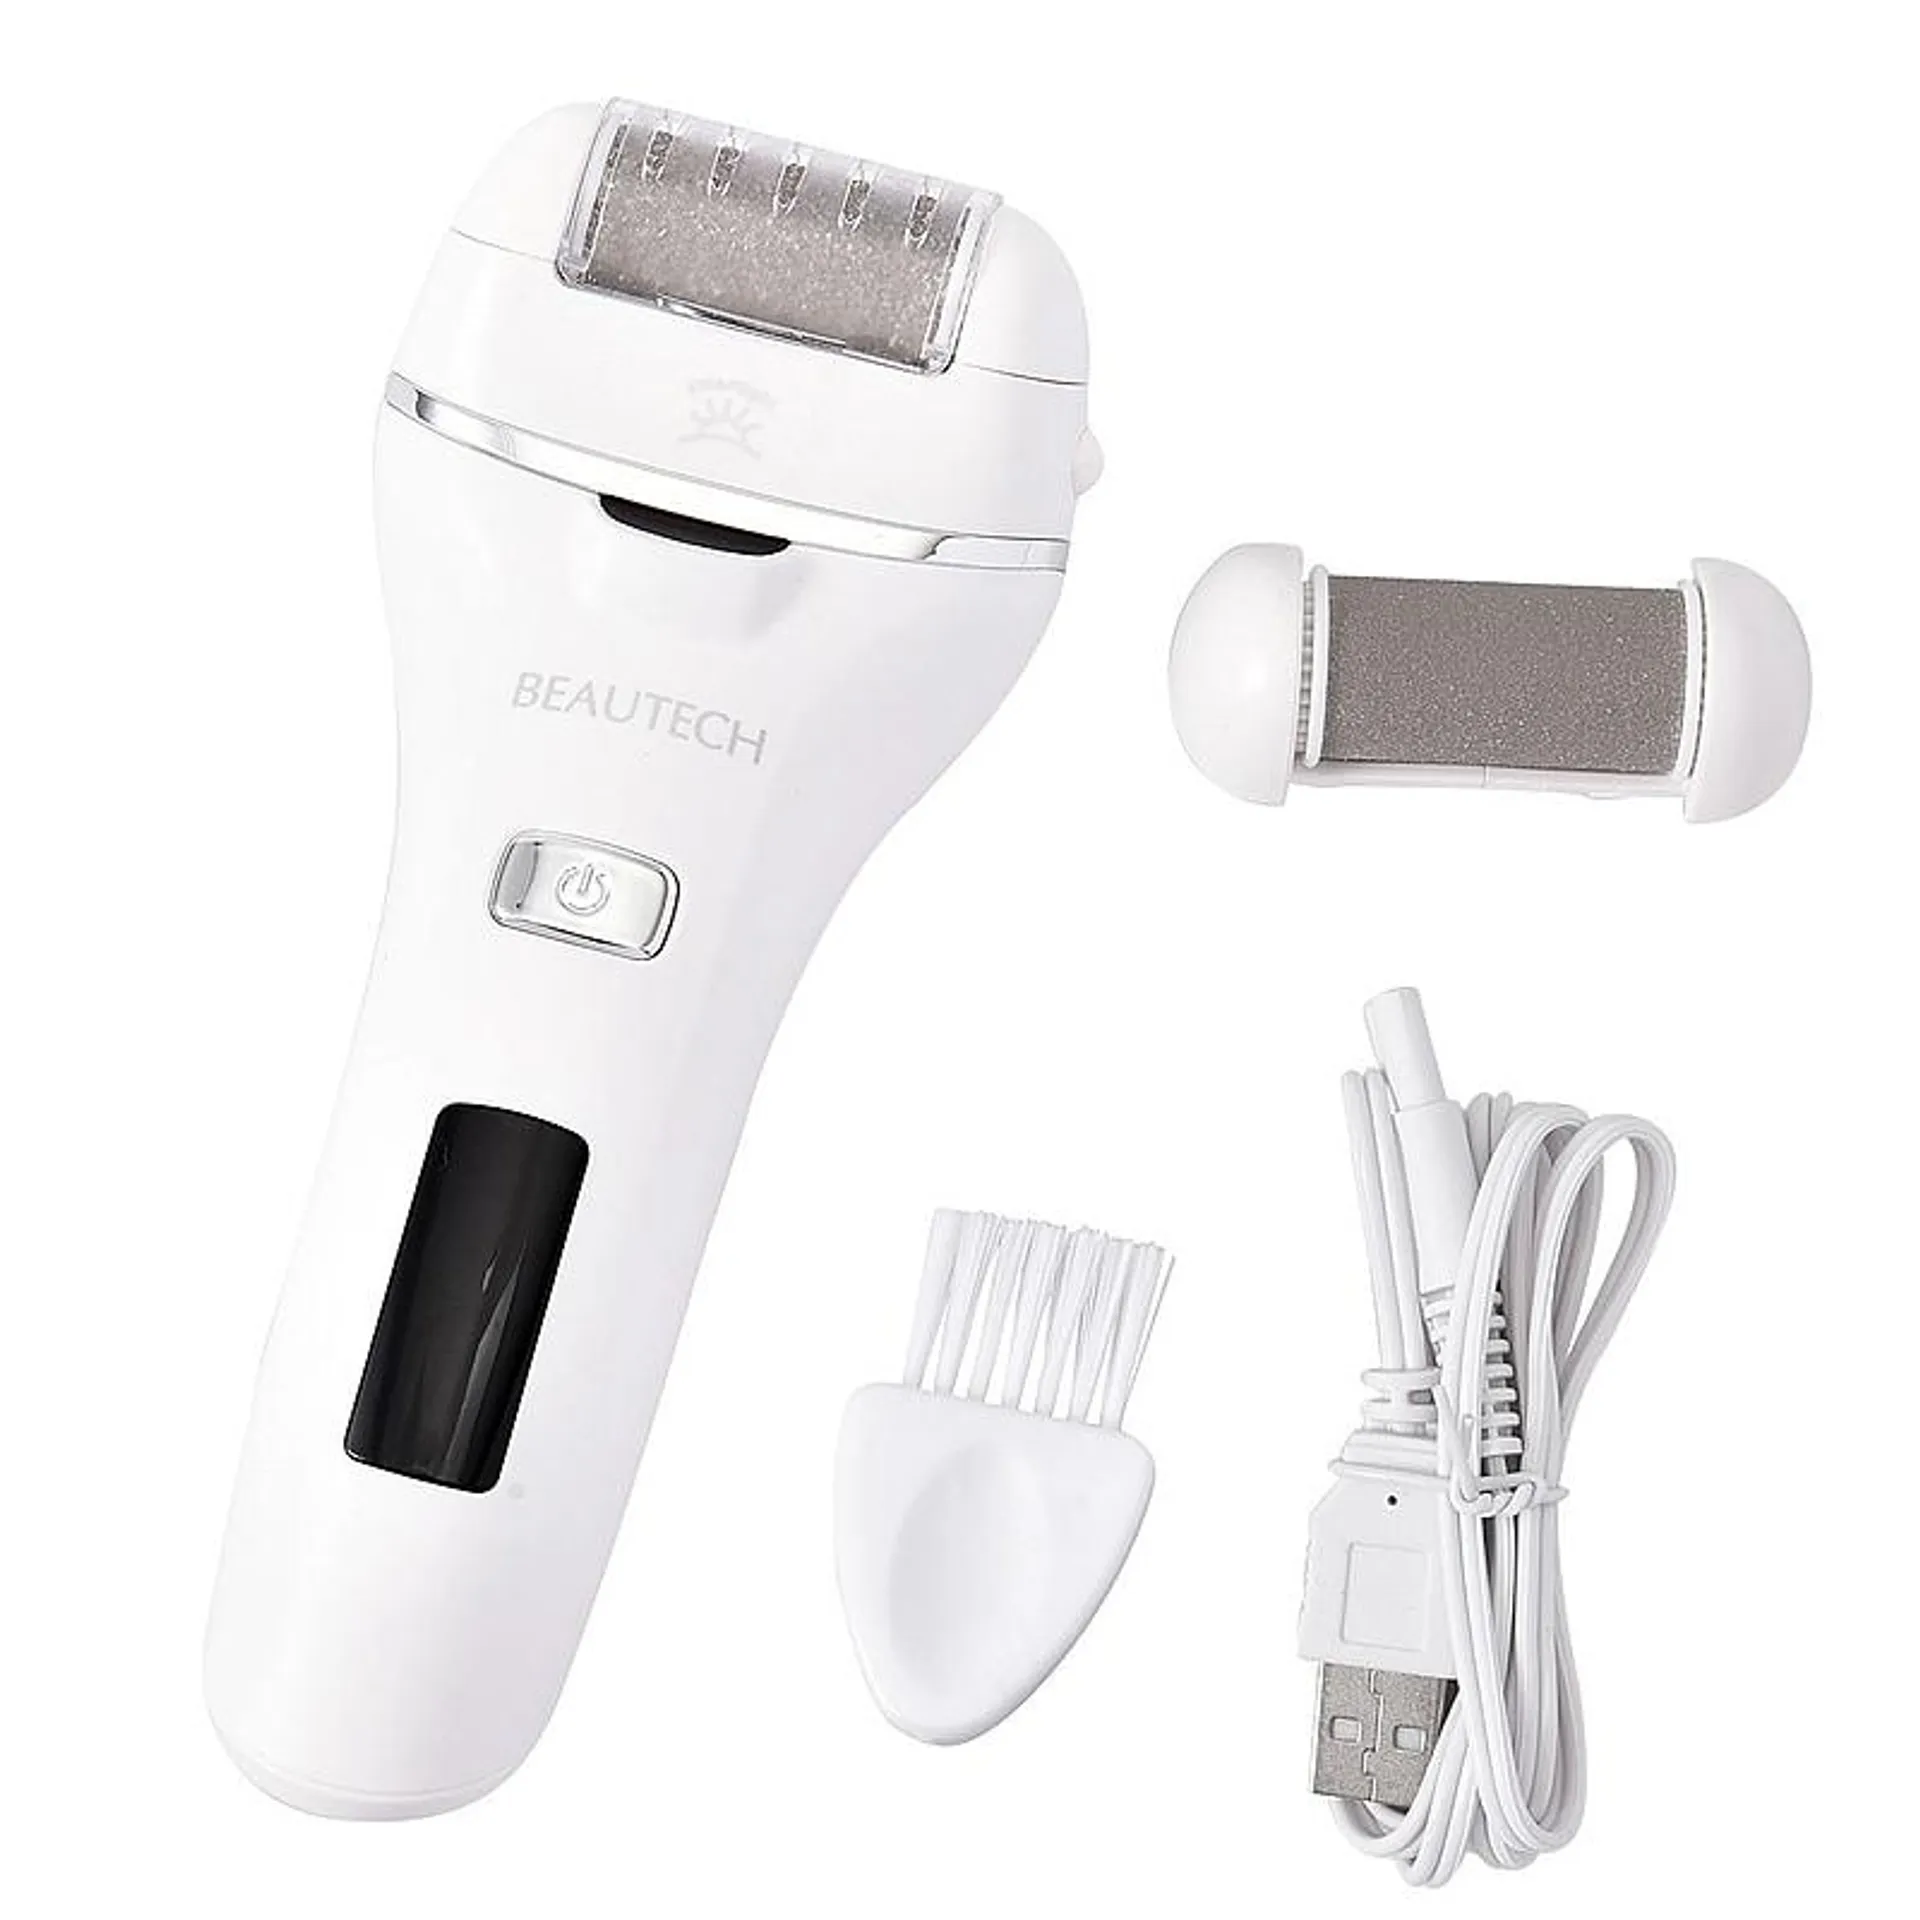 Beautech Rechargeable Wet or Dry Callus Remover (Size 16x7 Cm) - White